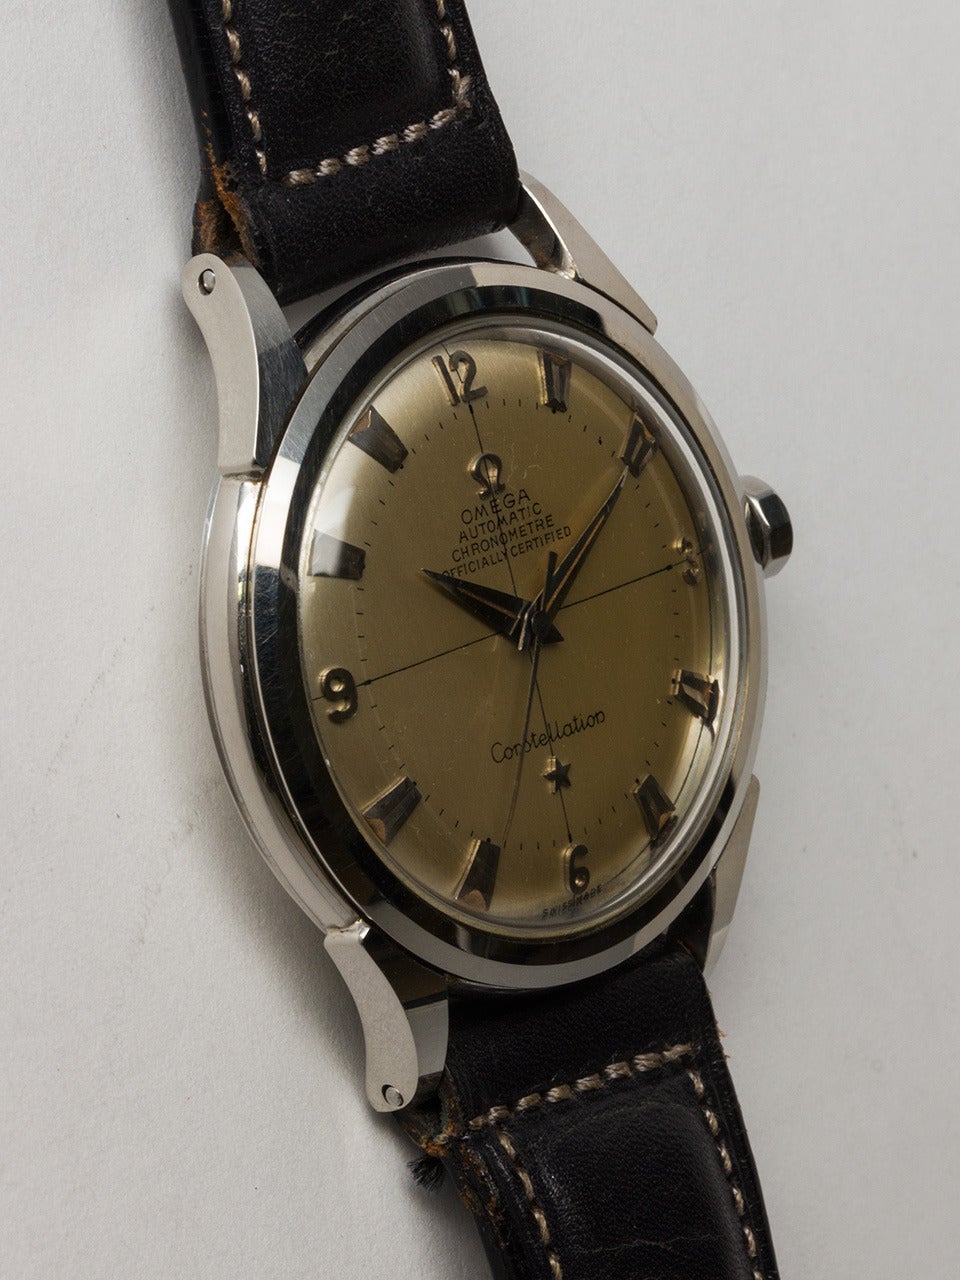 Omega Stainless Steel Constellation Wristwatch circa 1960s. Case measuring 35 x 42mm screw back case with Observatory logo. With beautiful original silvered satin dial with applied silver Arabic and flared indexes, applied Omega logo crown, printed